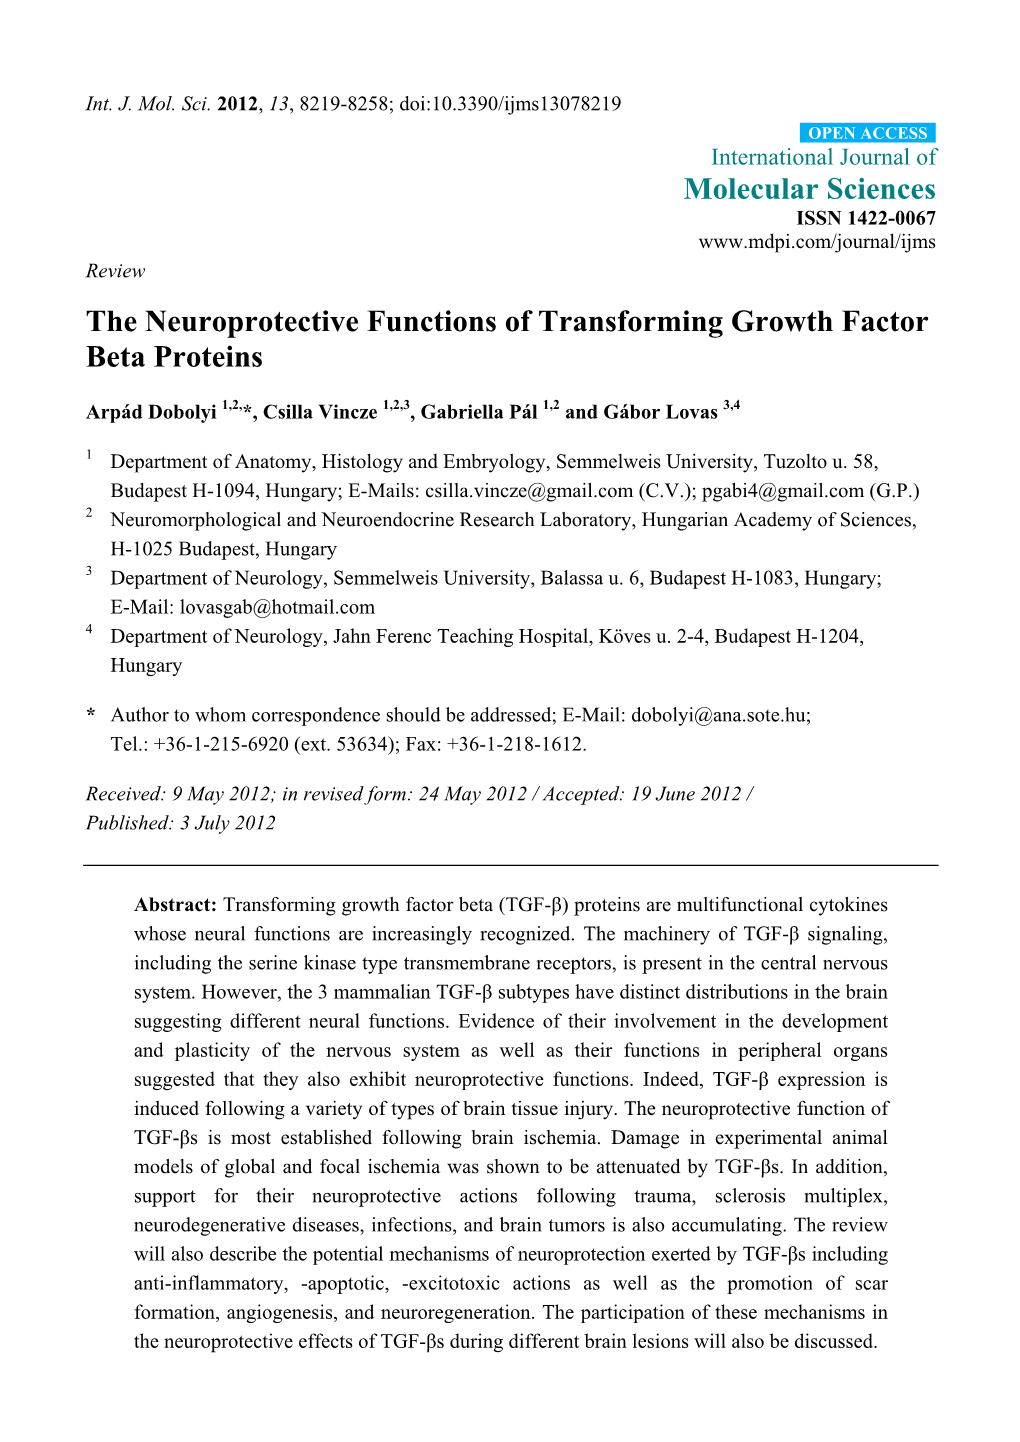 The Neuroprotective Functions of Transforming Growth Factor Beta Proteins